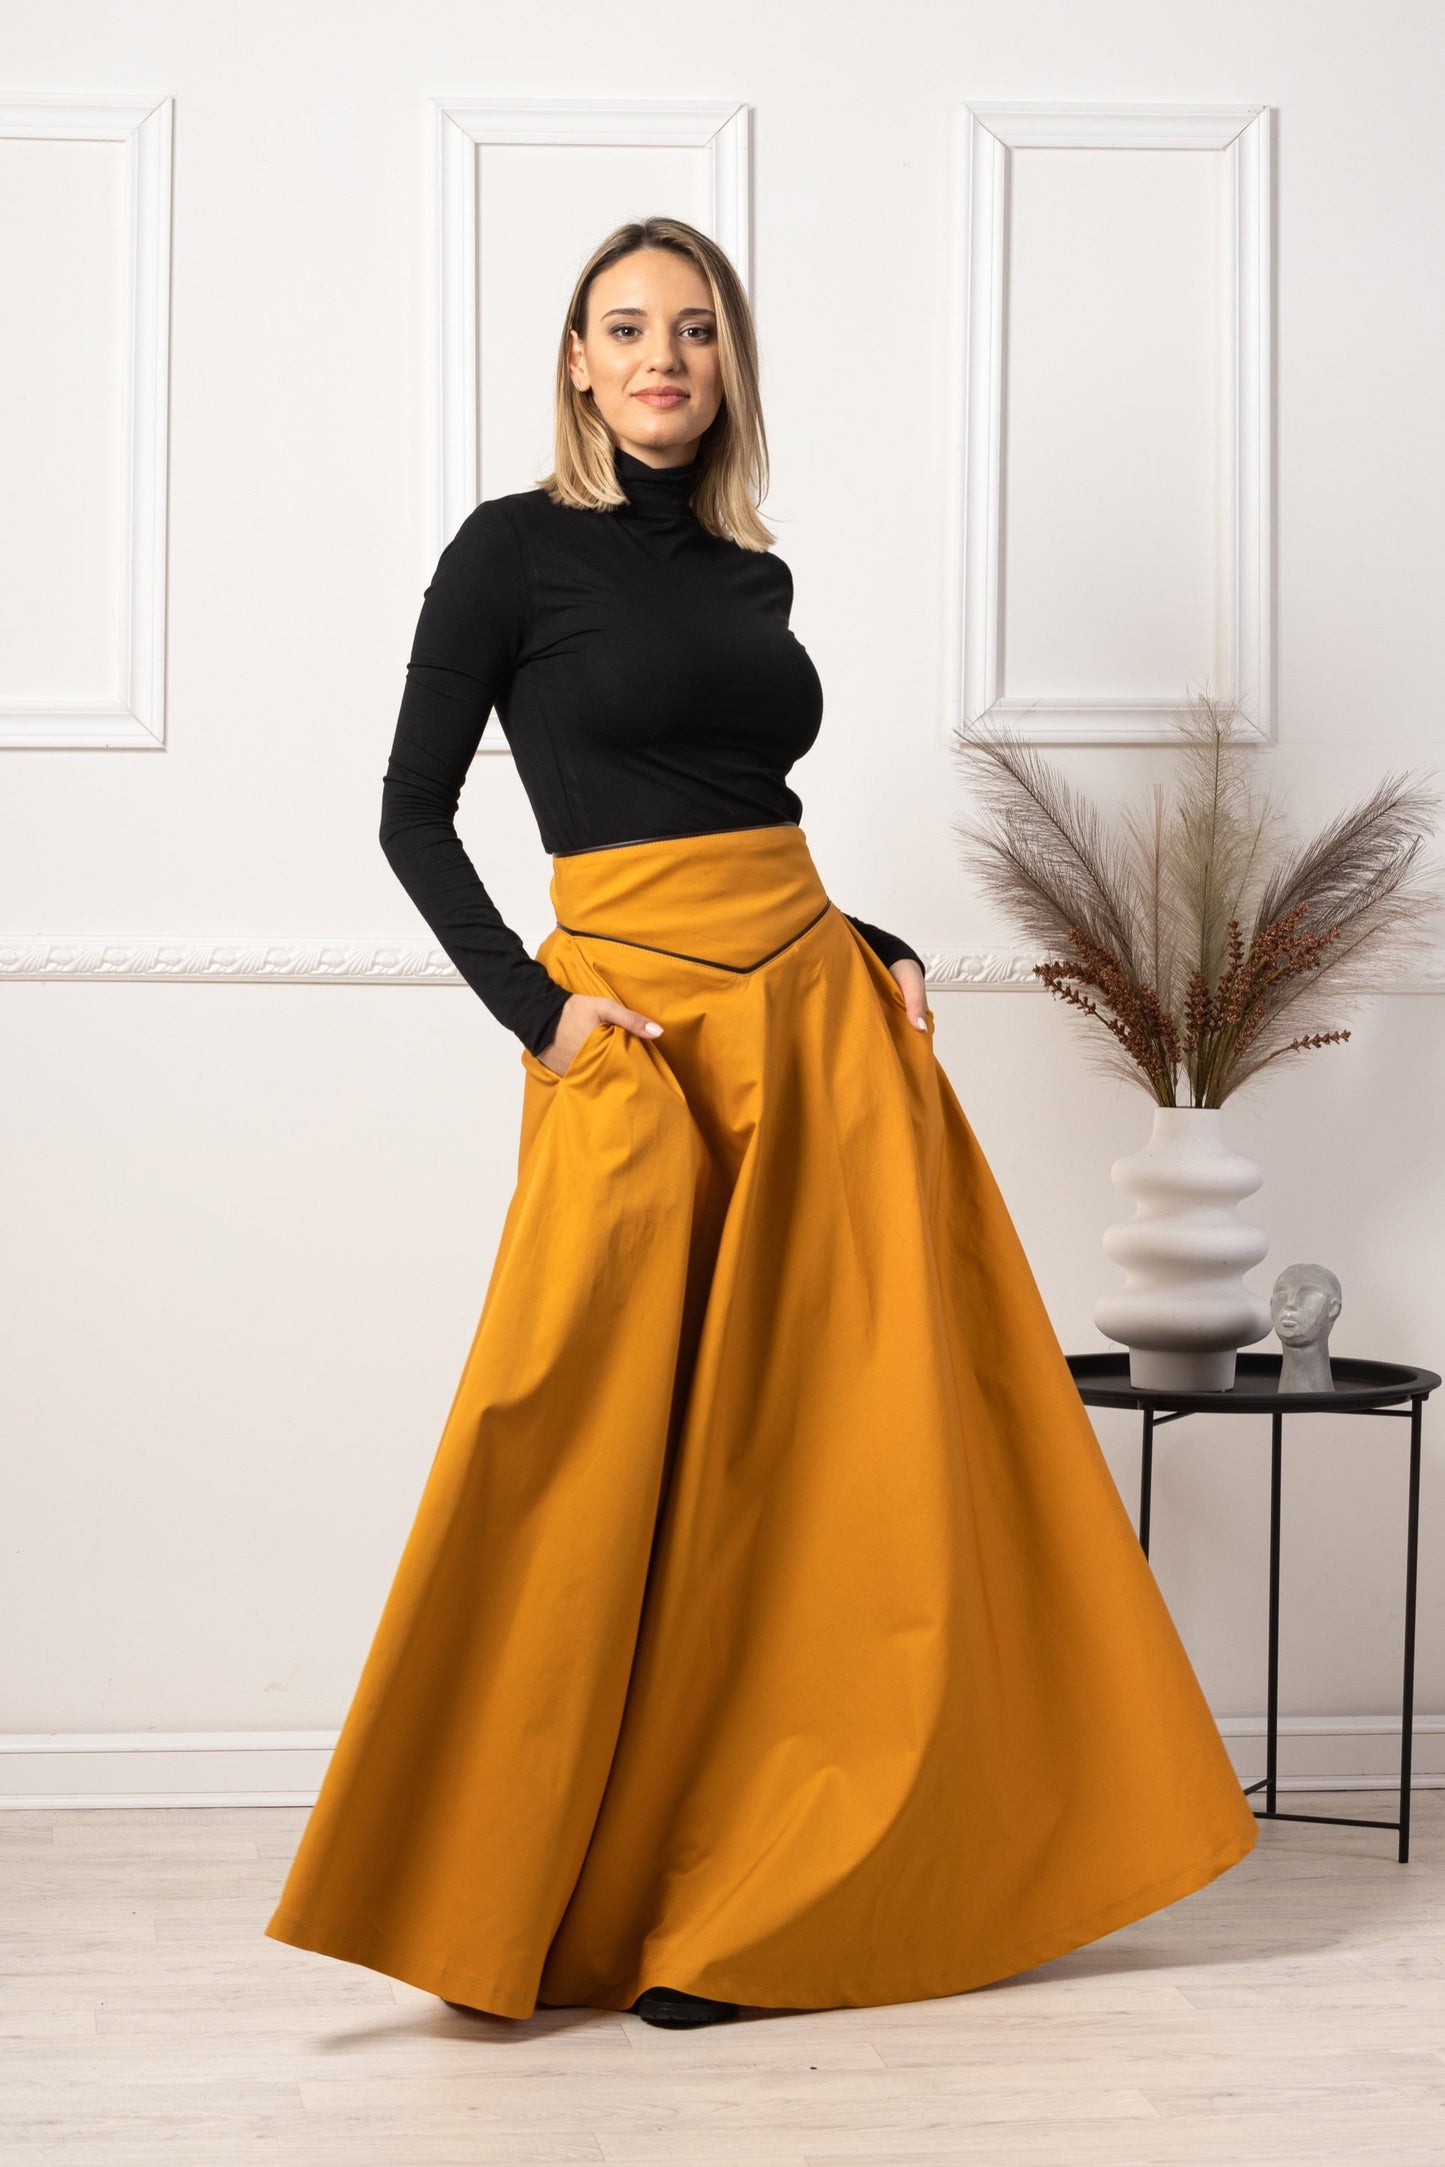 High Waist Victorian Skirt in a full-length view from NikkaPlace | Effortless fashion for easy living